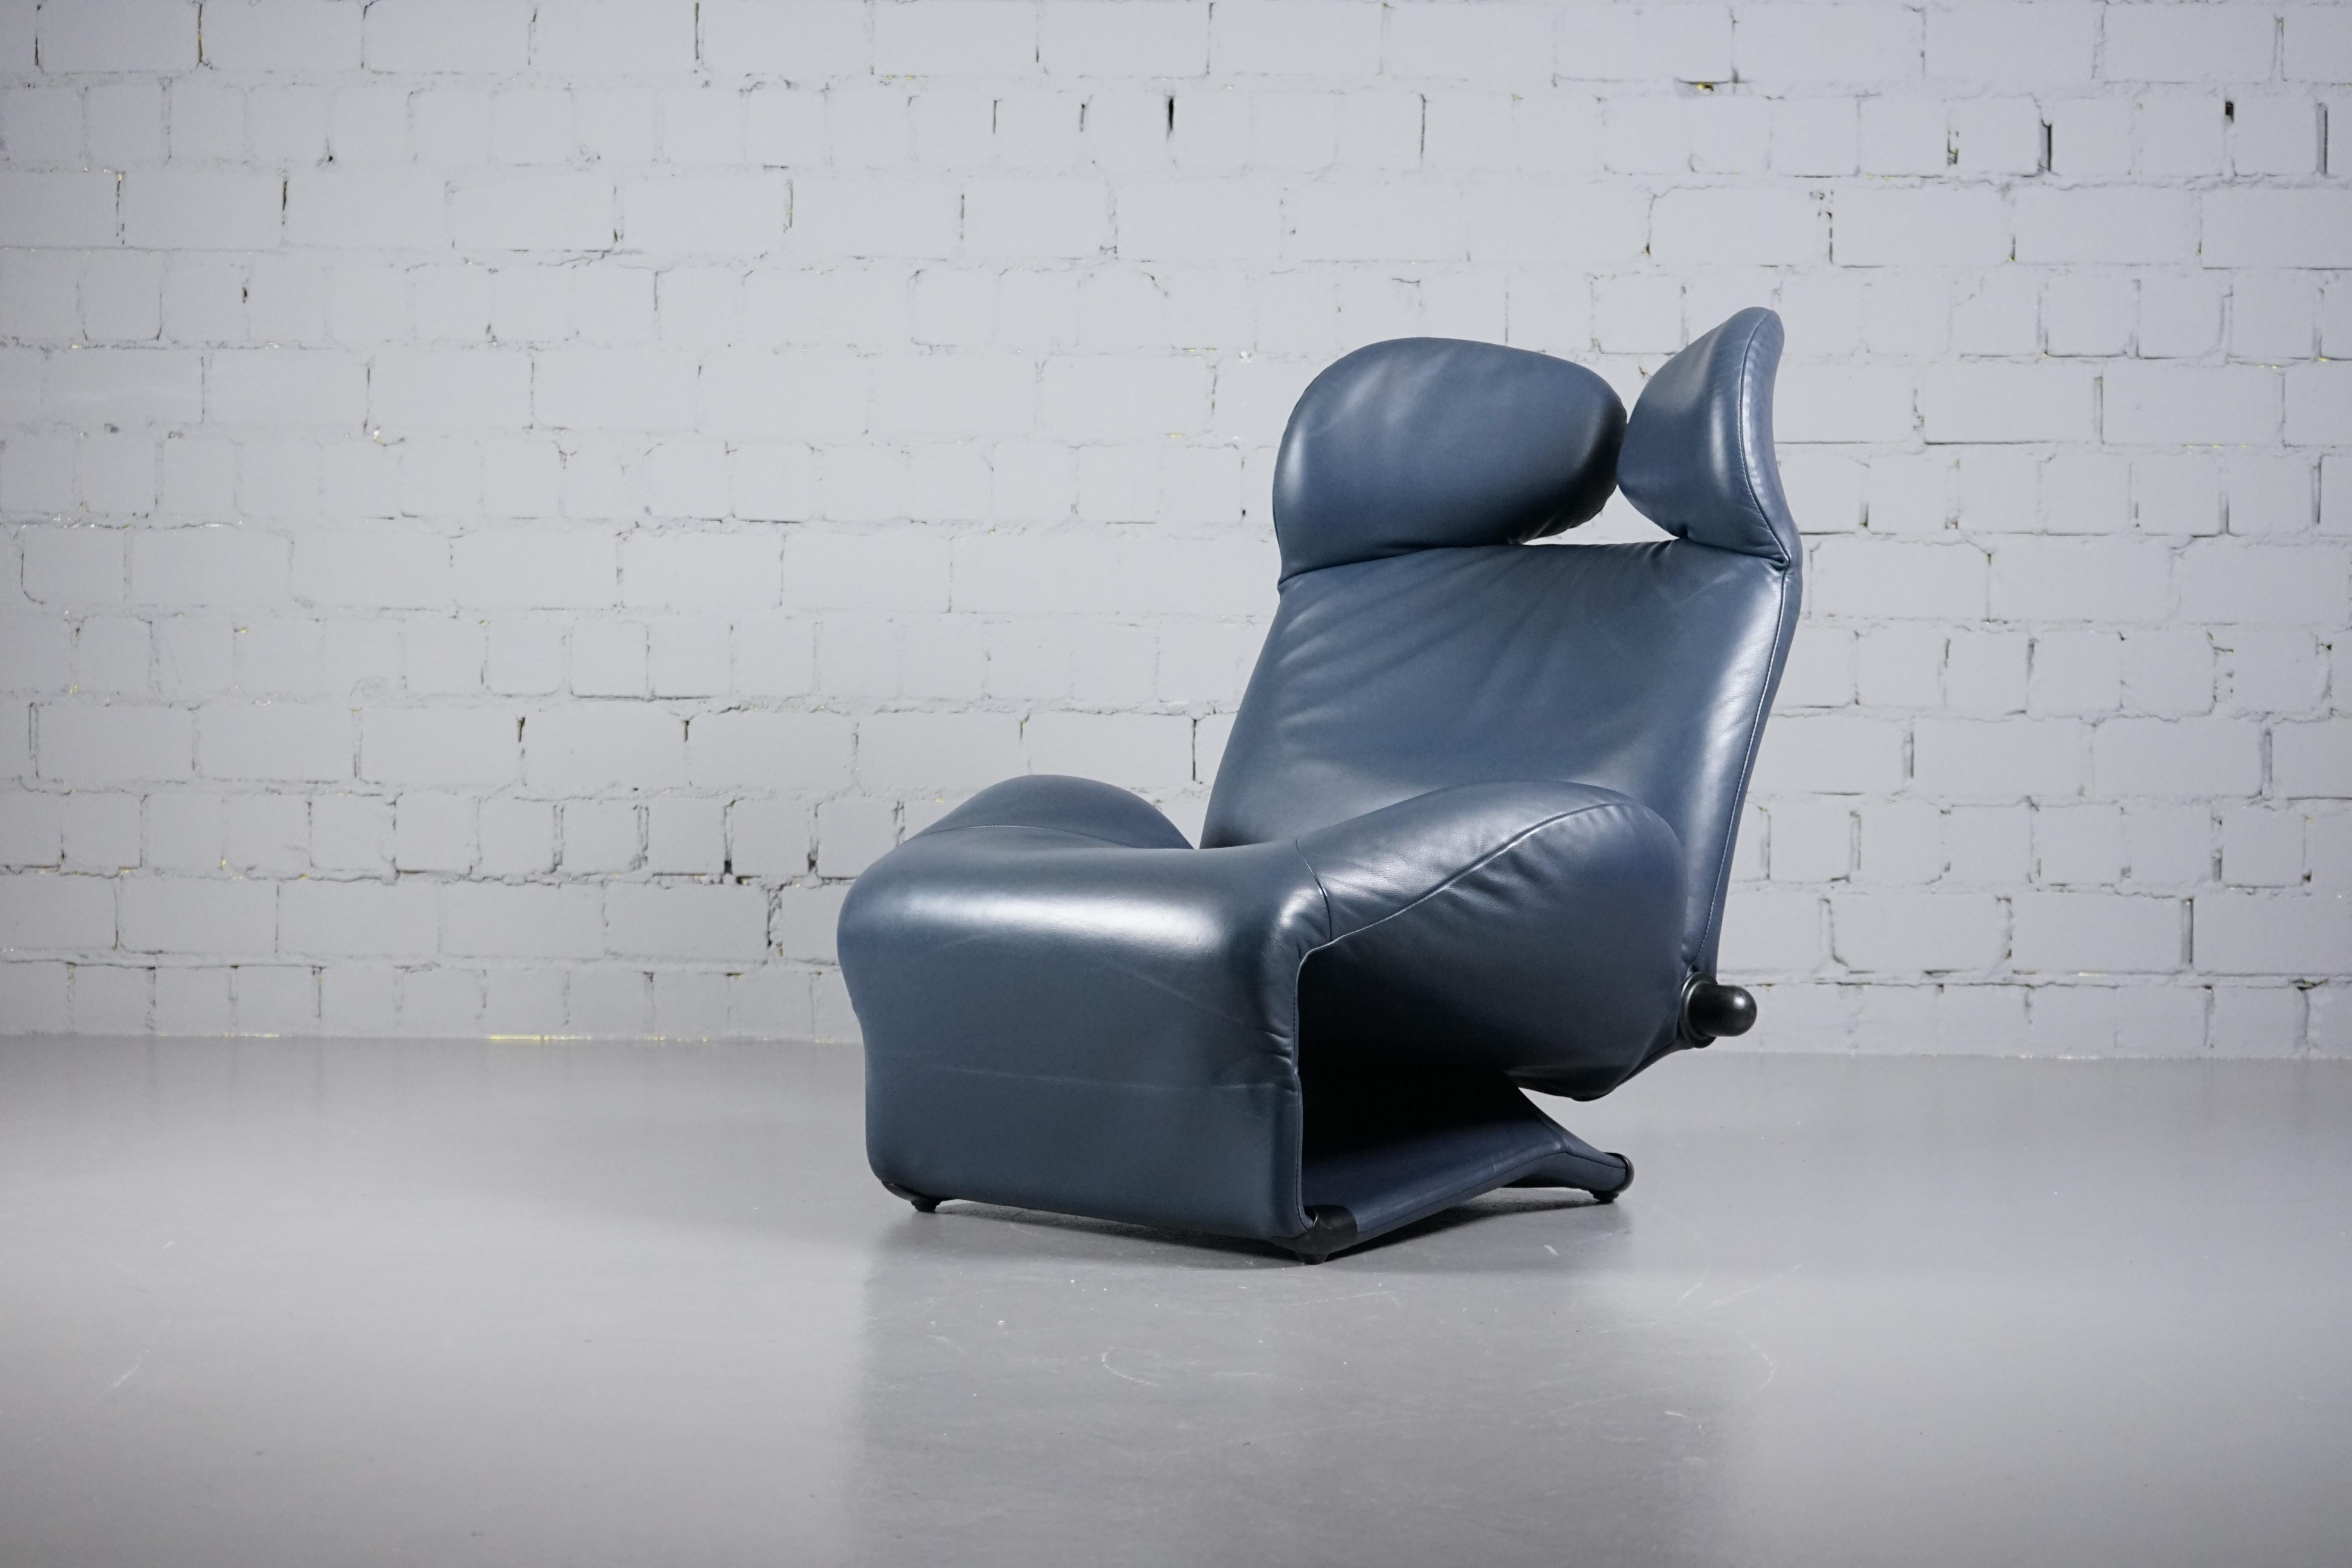 Grey-Blue Leather Wink Lounge Chair by Toshiyuki Kita for Cassina, 1980s For Sale 6